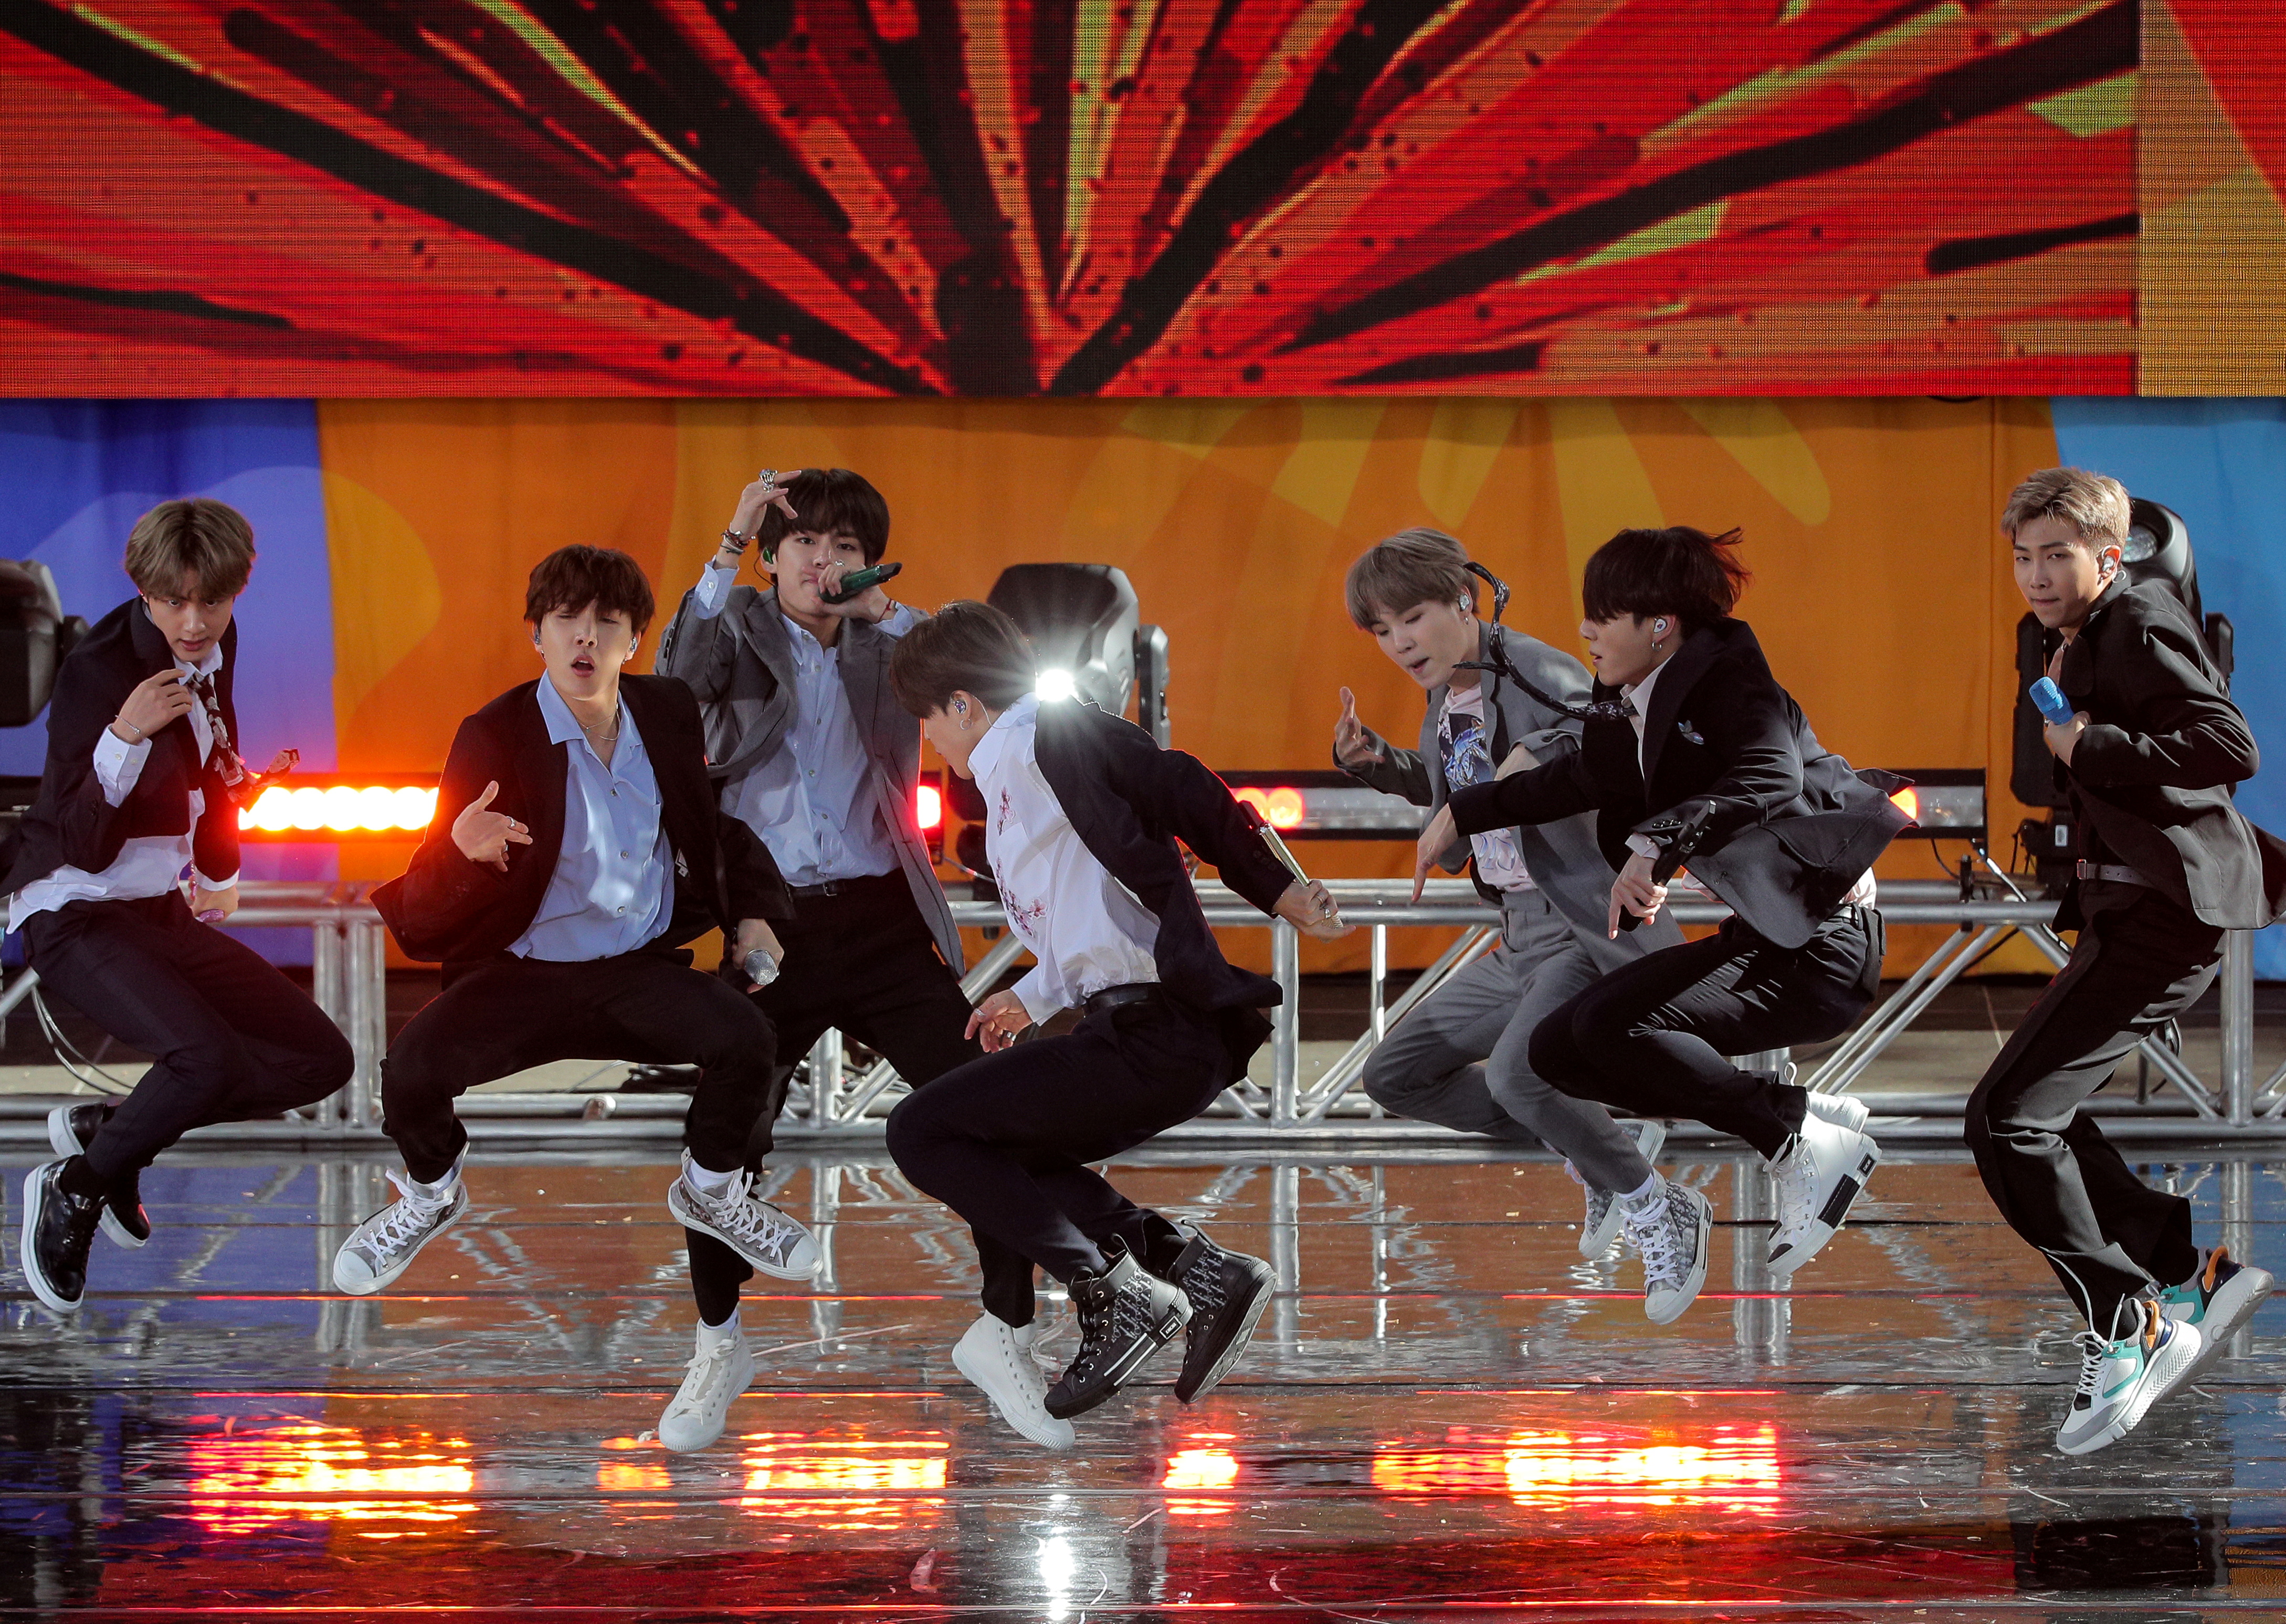 Members of K-Pop band, BTS perform on ABC's 'Good Morning America' show in Central Park in New York